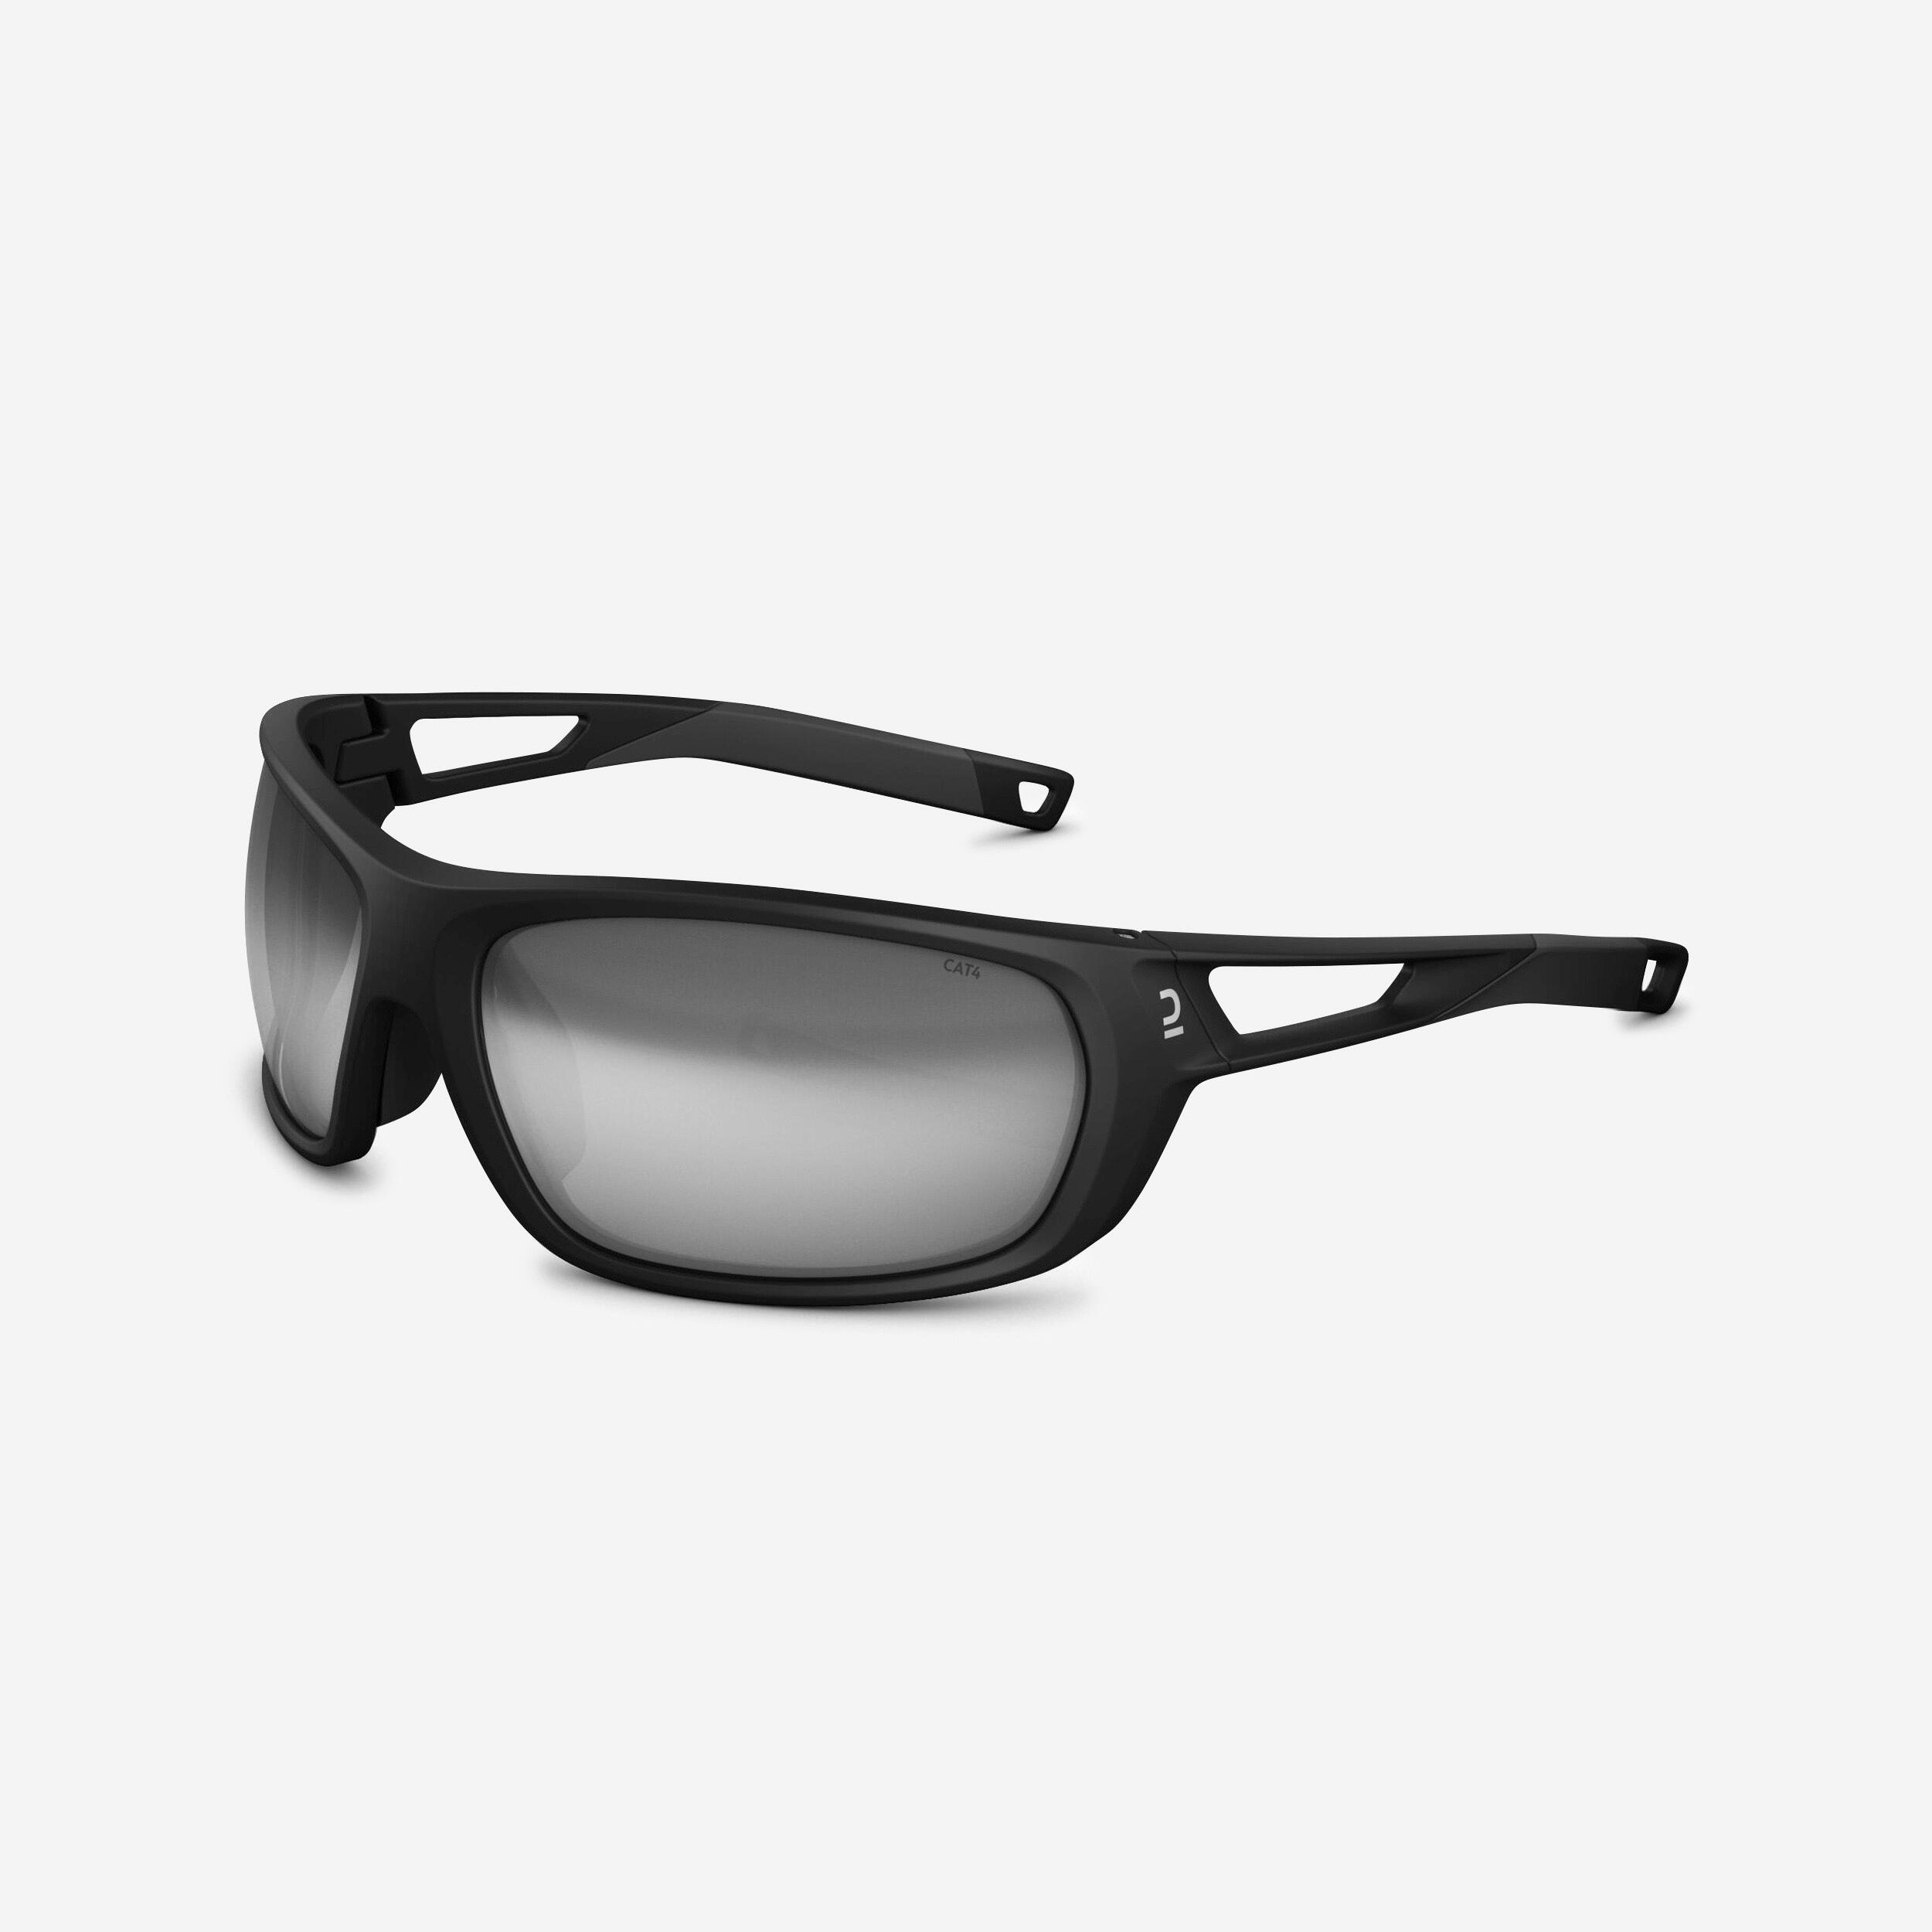 Adult hiking sunglasses MH580 – Category 4 1/9